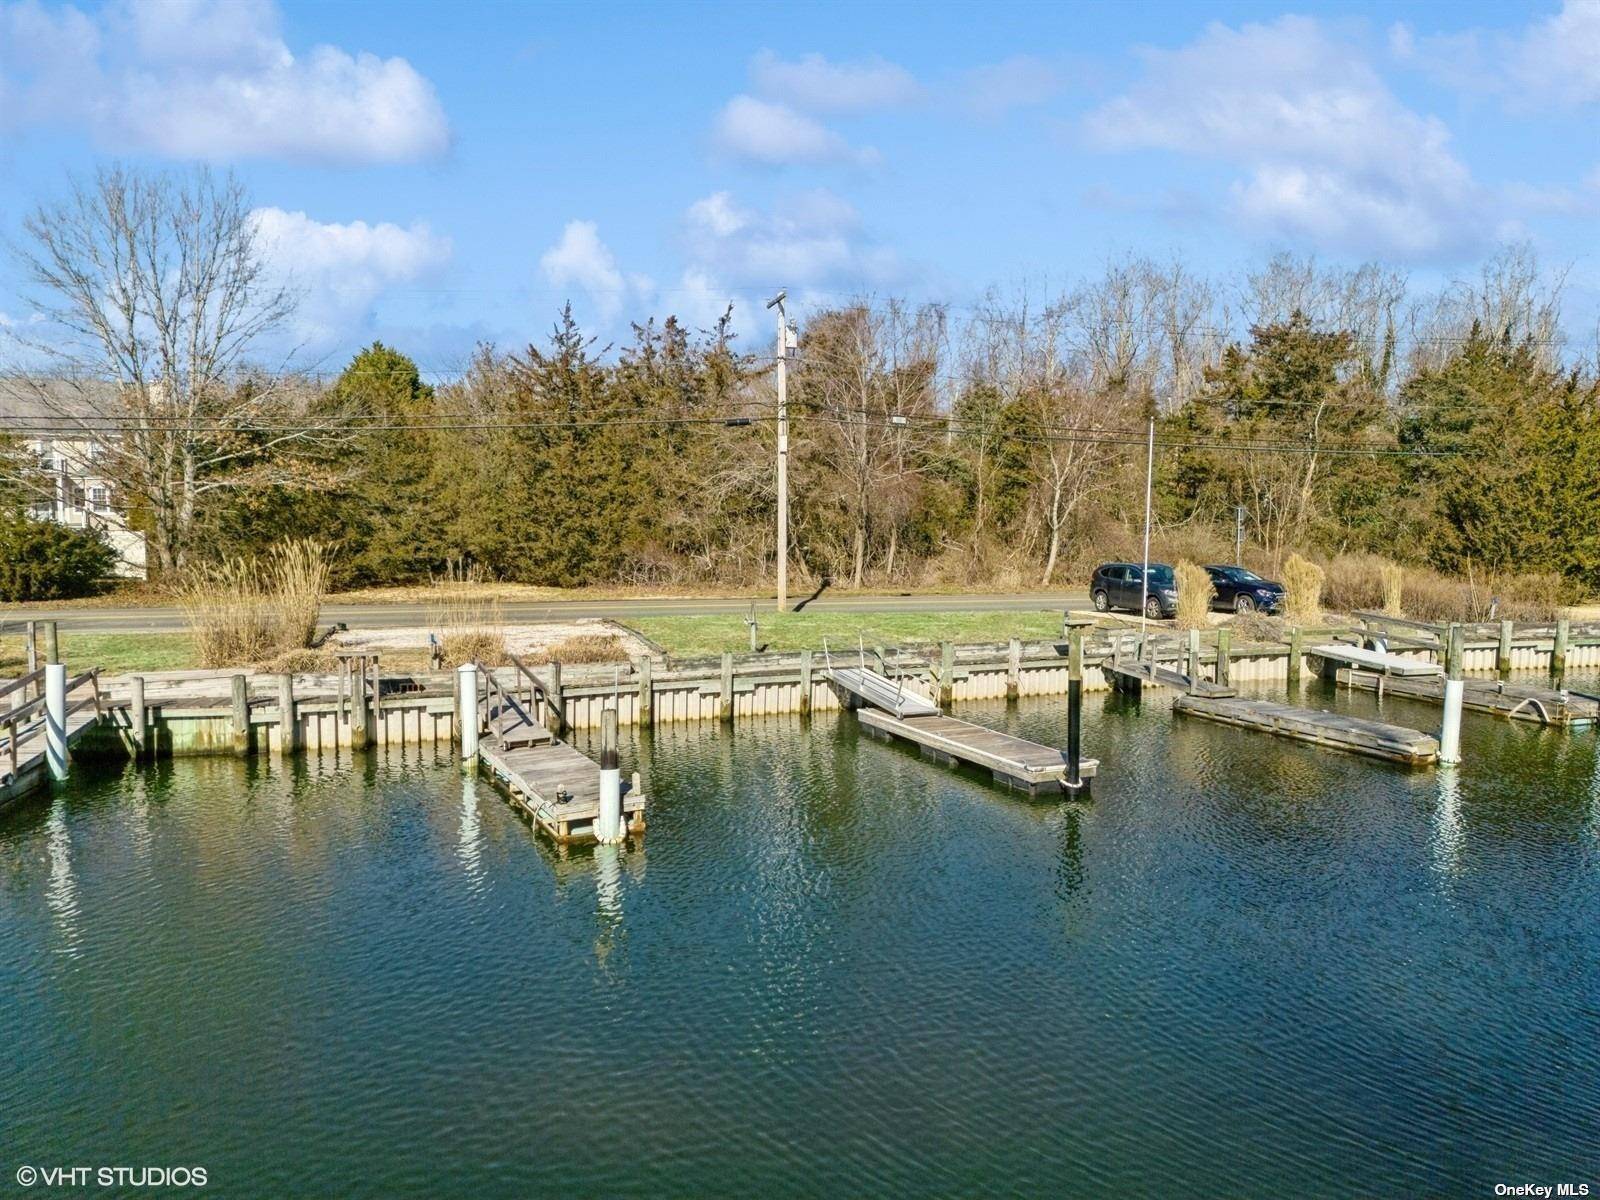 Jamesport Design and build your dream home on this shy acre property with 2 Boat slips on canal leading to Peconic Bay.